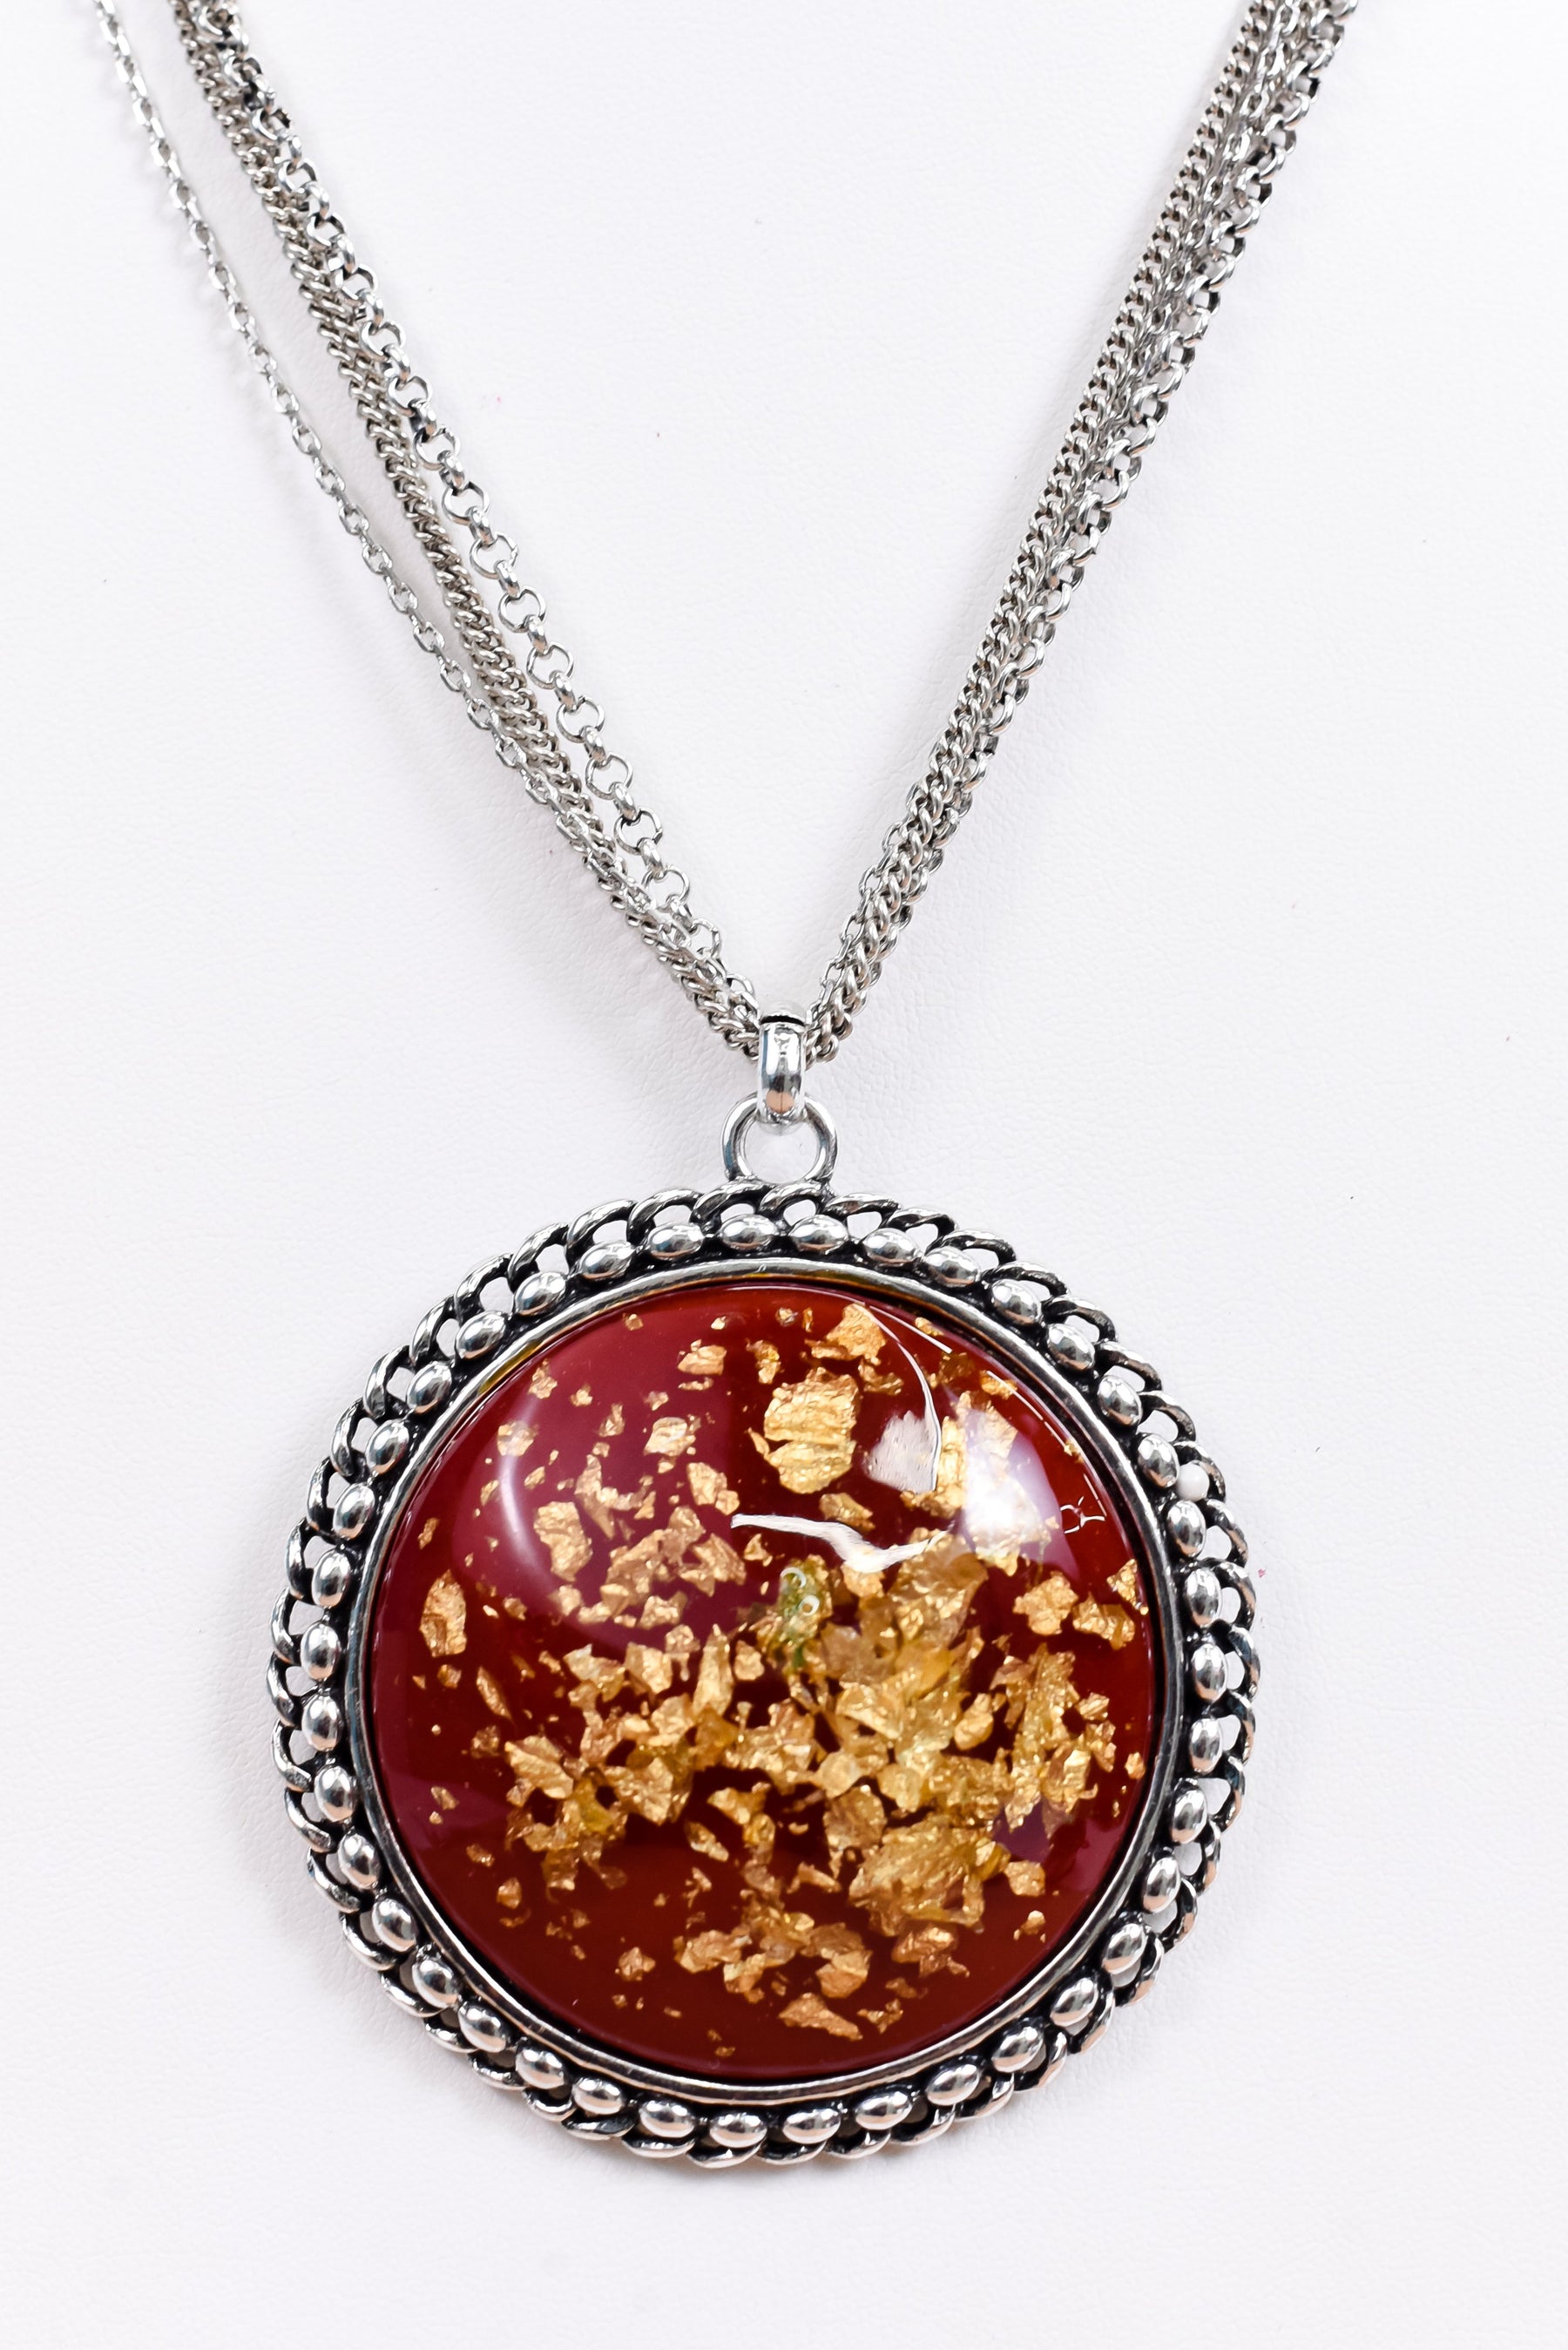 Silver/Red/Gold/Layered/Resin Circle Pendant Necklace - NEK3903RD